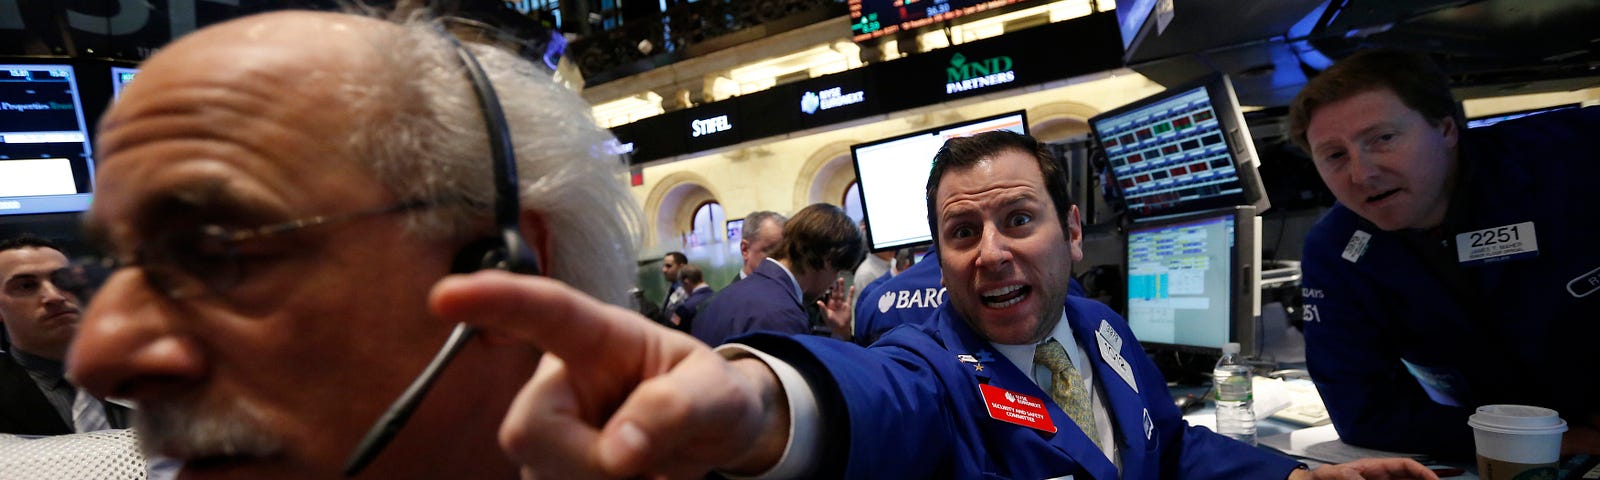 Barclays specialist trader Michael Pistillo shouts out a price just after the opening bell on the floor at the New York Stock Exchange, March 15, 2013. REUTERS/Brendan McDermid (UNITED STATES - Tags: BUSINESS) - RTR3F1A6